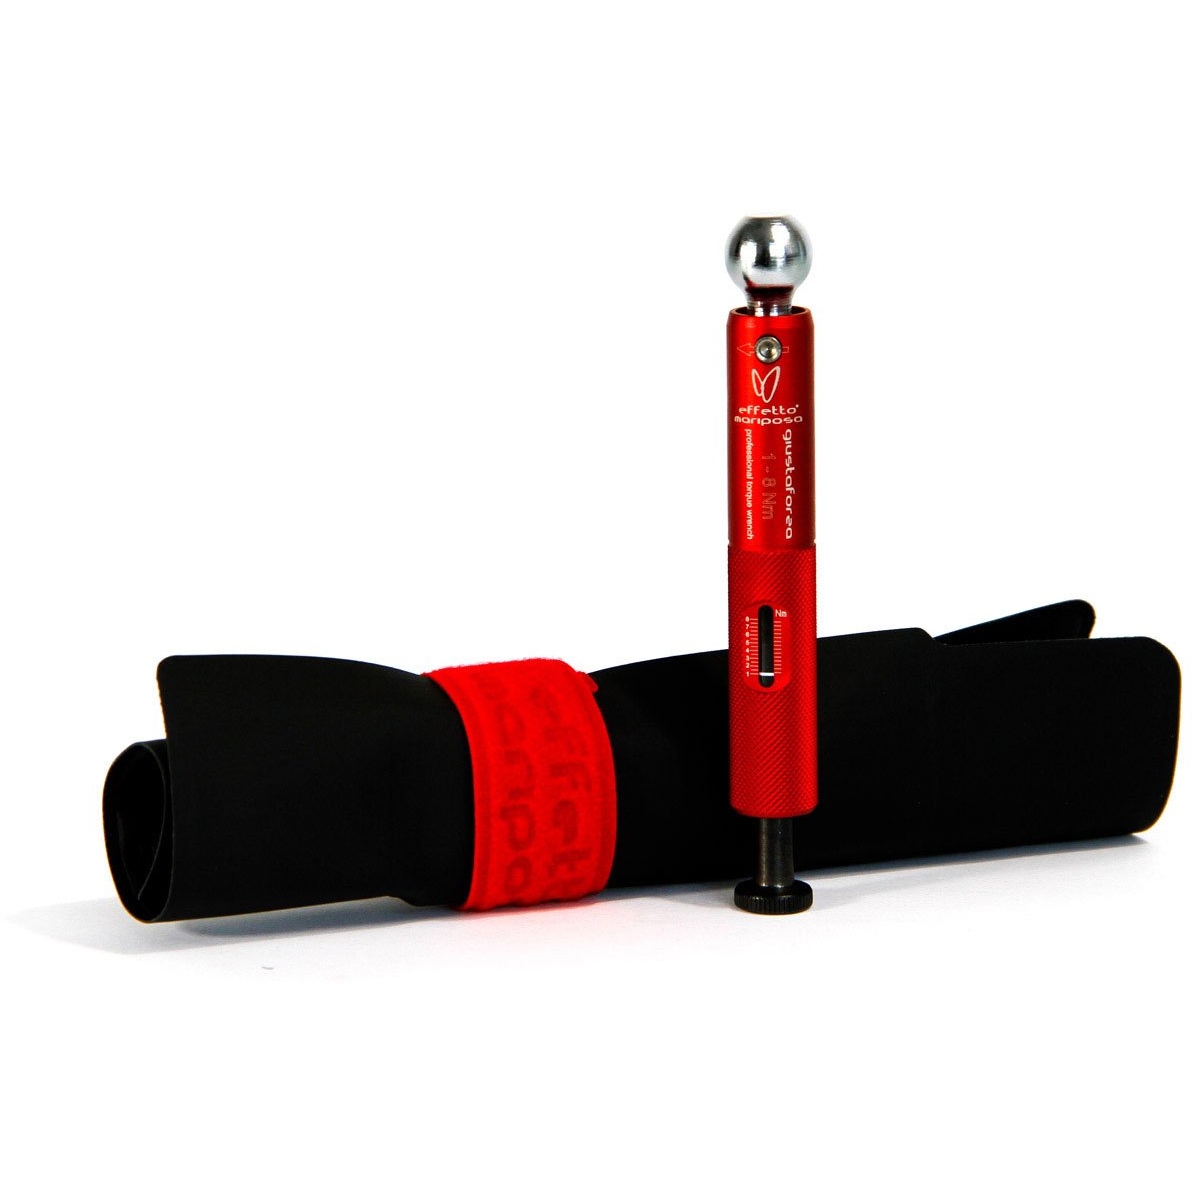 Image of Effetto Mariposa Giustaforza Torque Wrench 1-8 Nm DELUXE incl. bits - red-silver